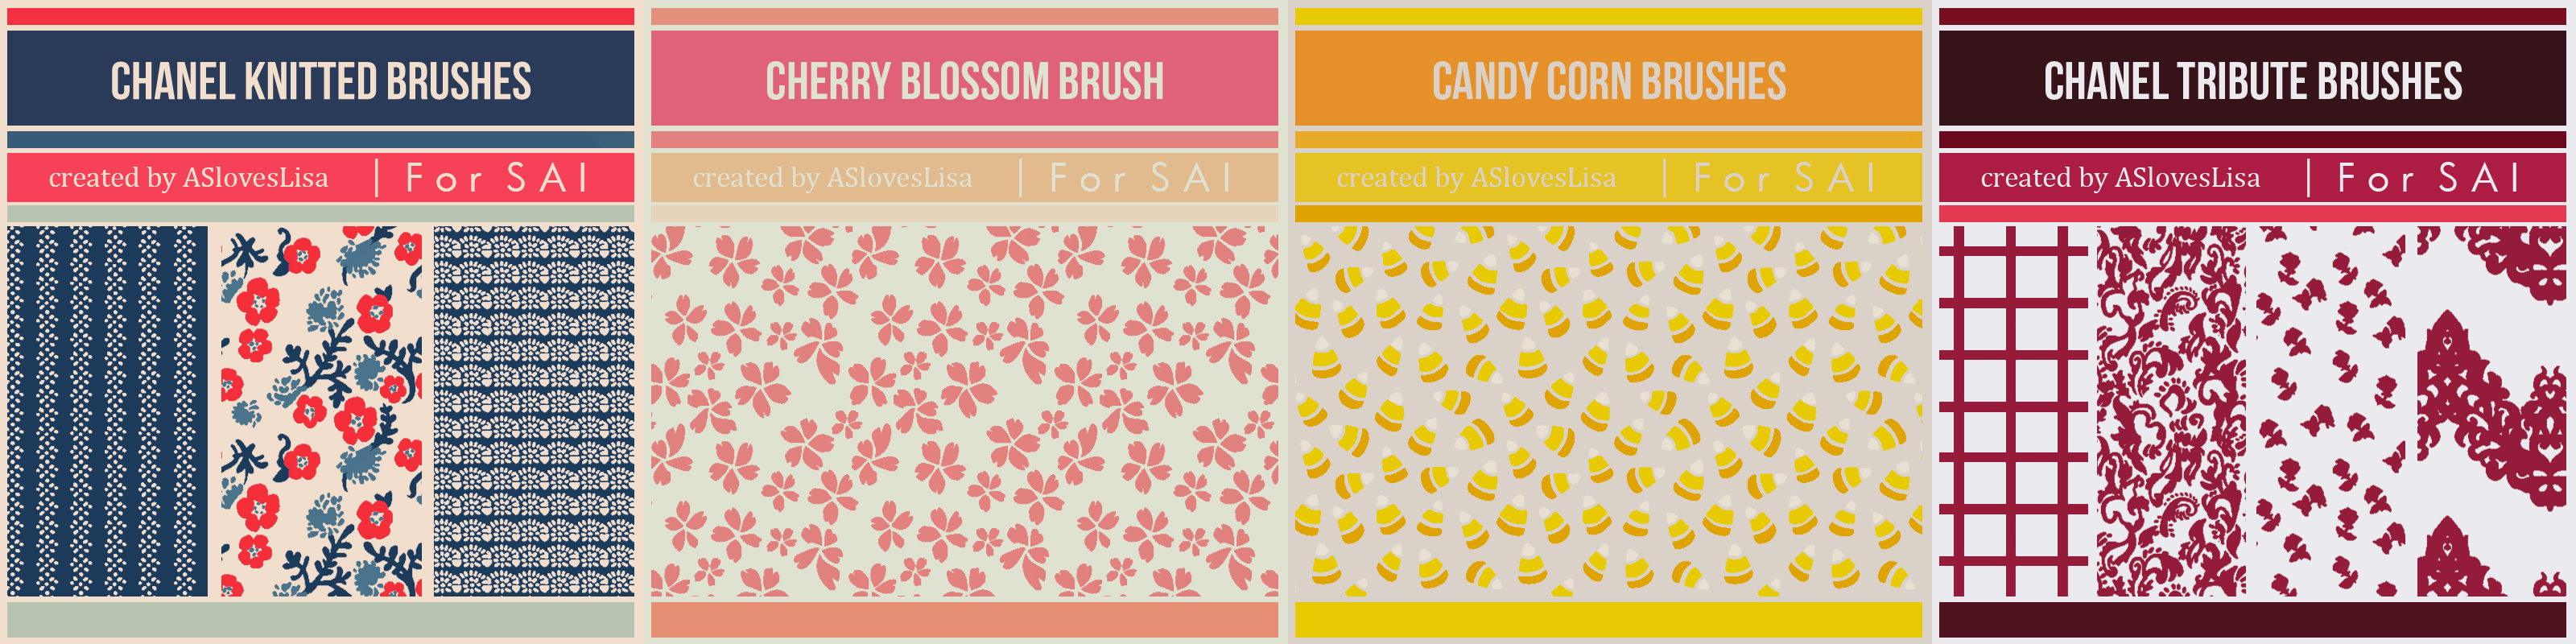 _for_sai__candy_corn_brushes_by_asloveslisa-d6shtfh_副本.png